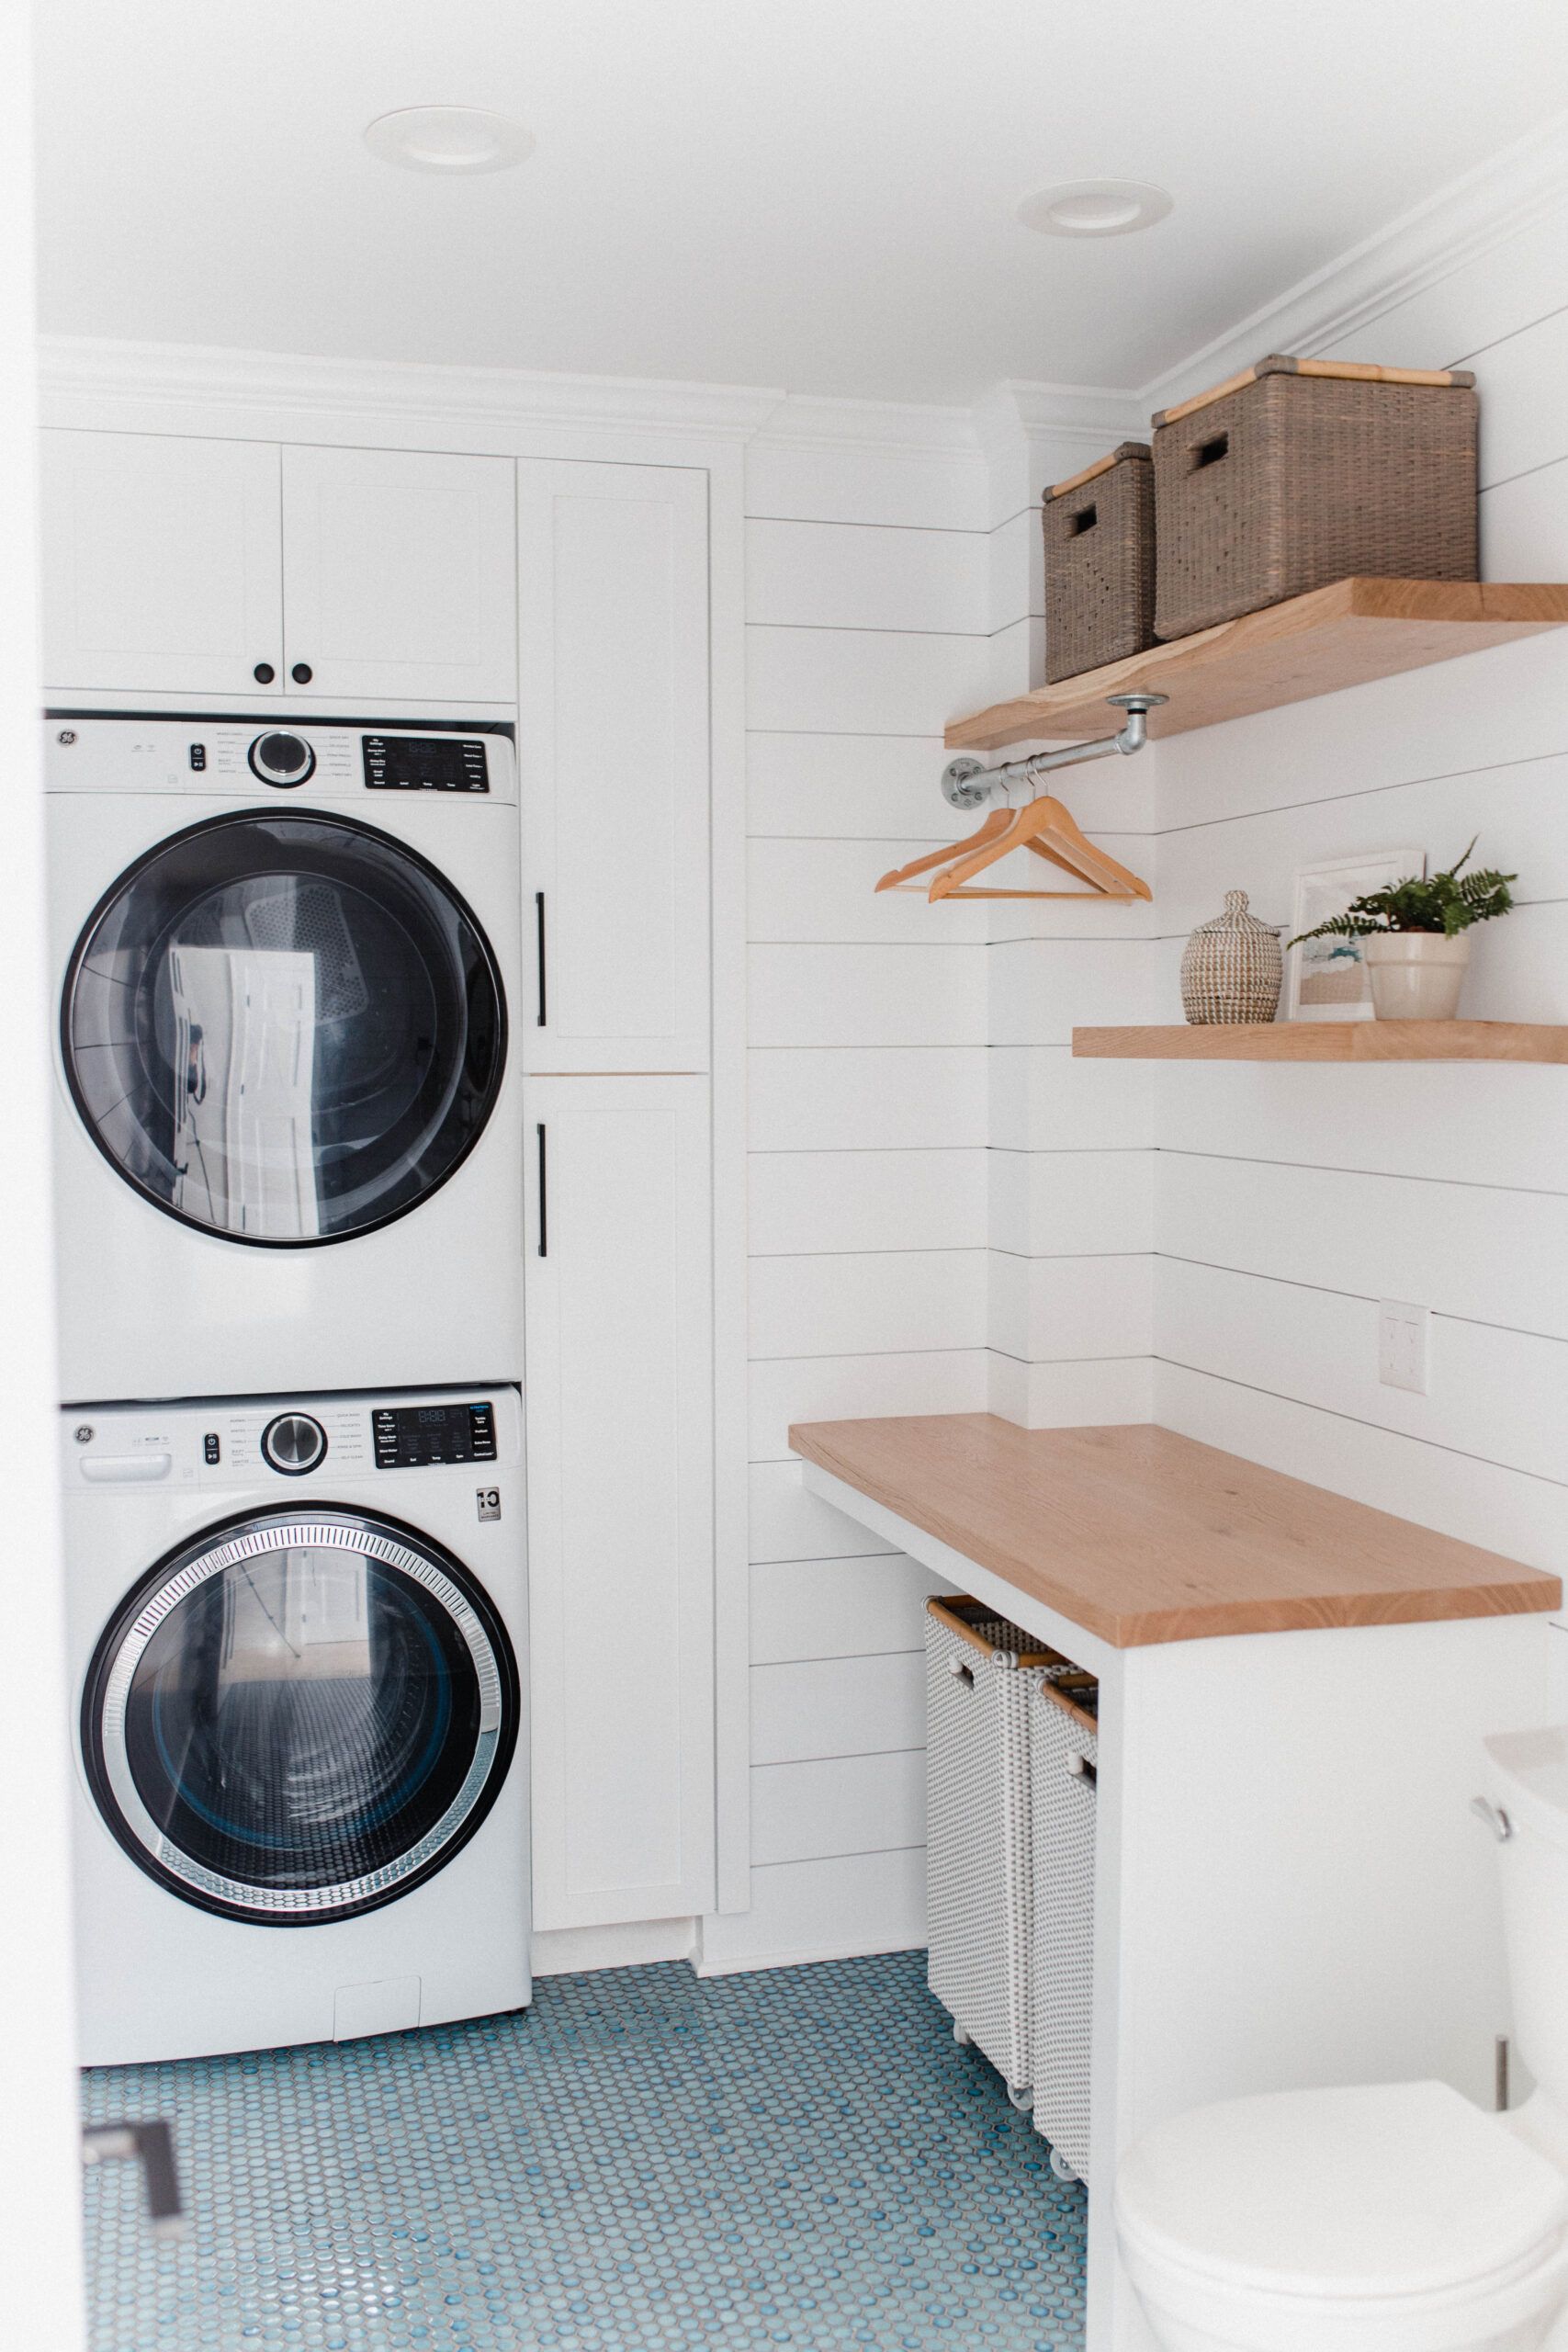 9 laundry room cabinet ideas: tips for an organized space